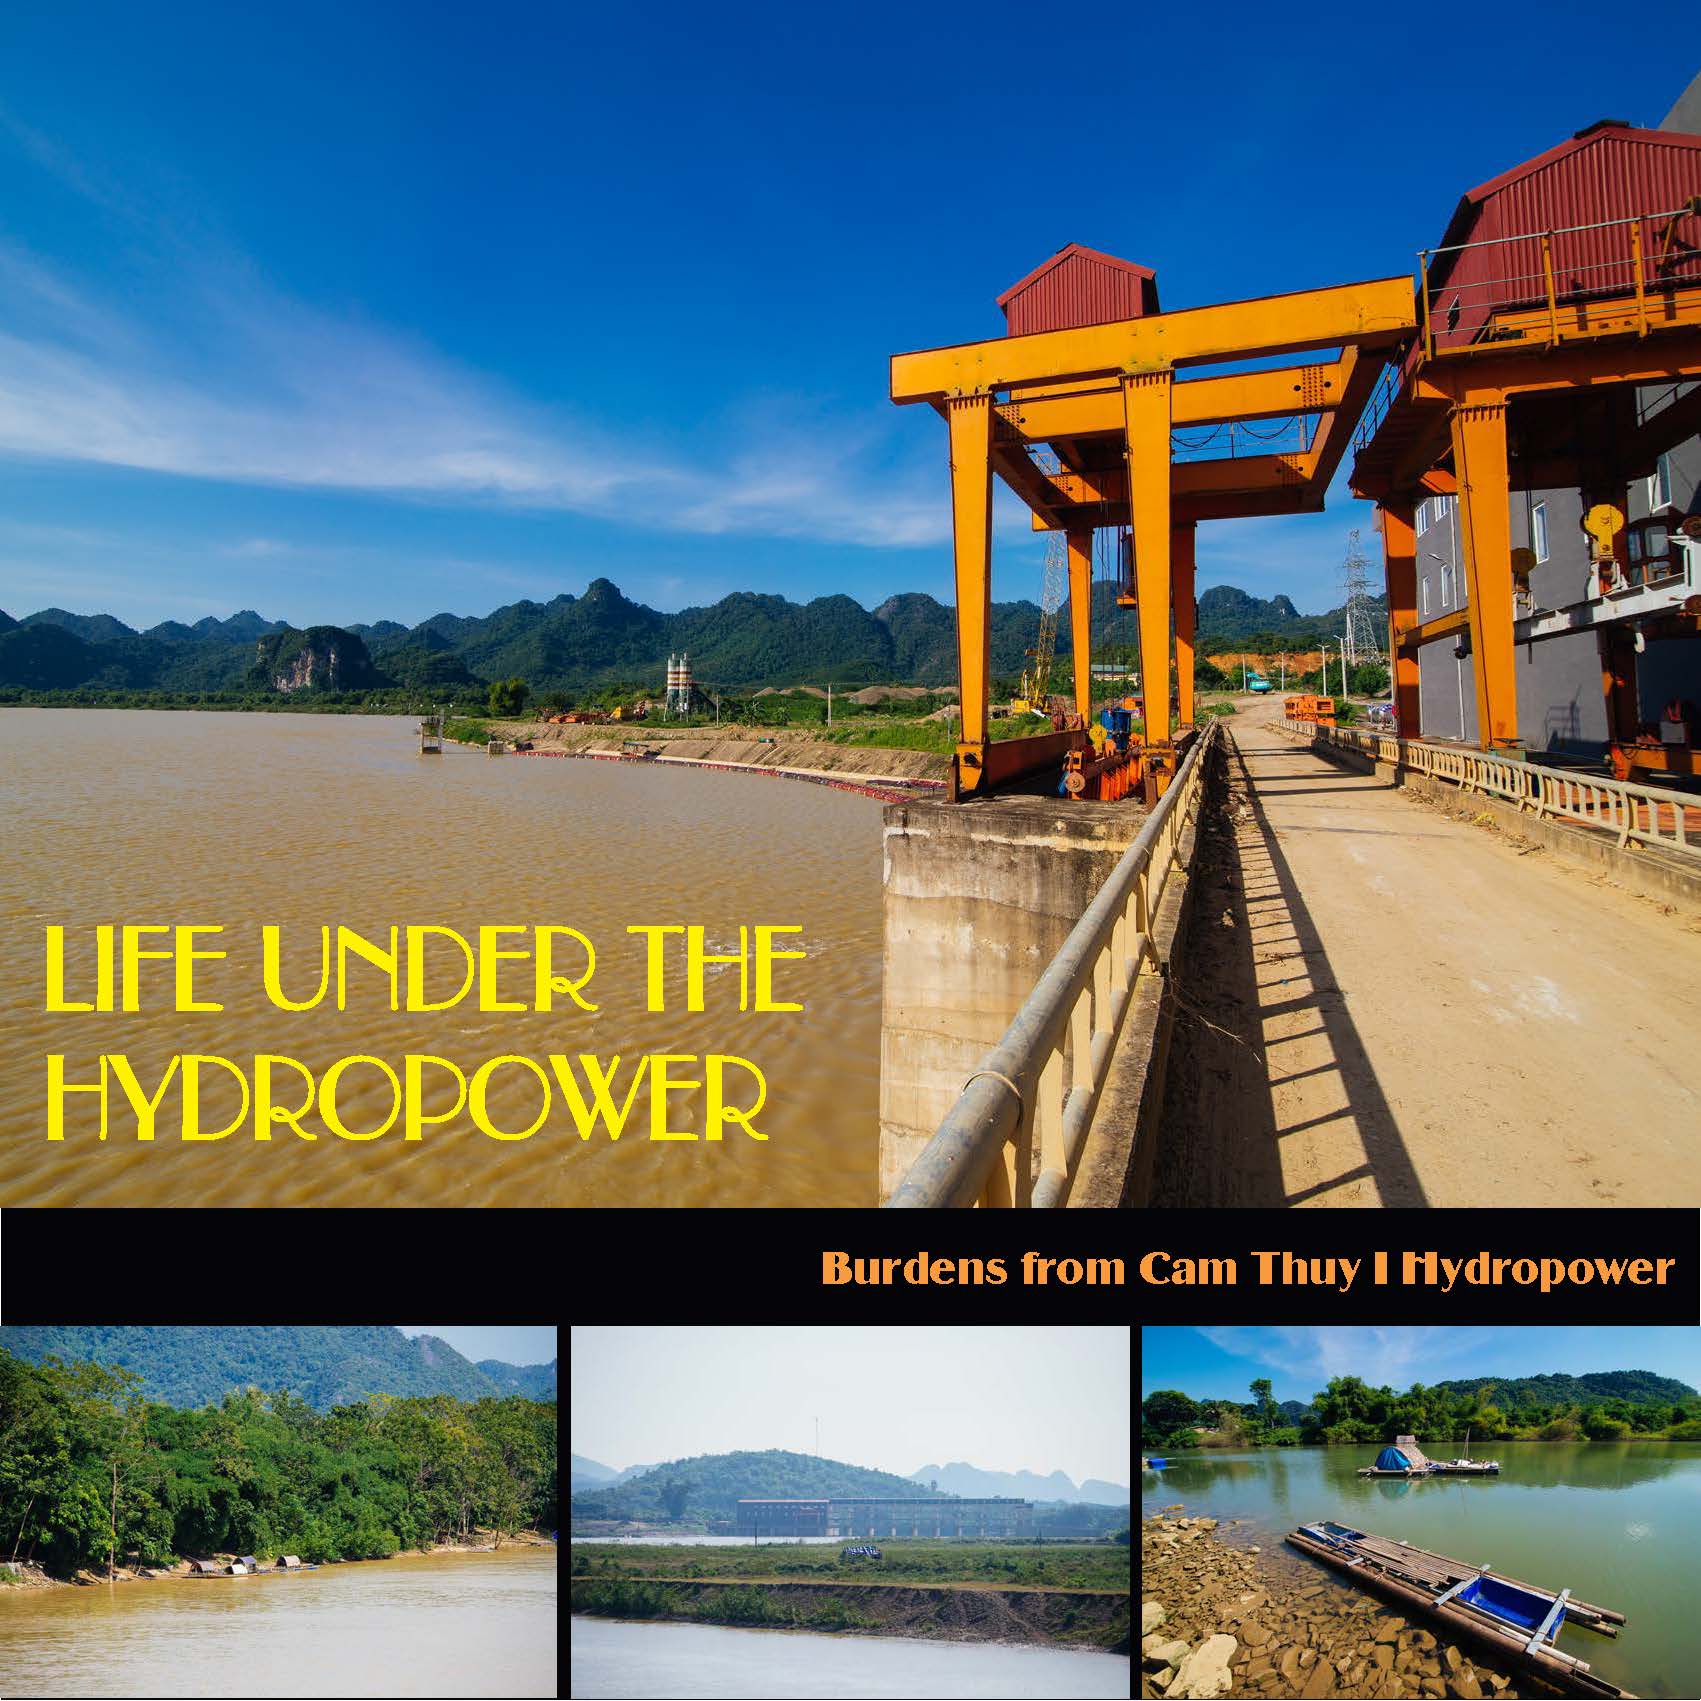 LIFE UNDER THE HYDROPOWER – BURDENS FROM CAM THUY 1 HYDROPOWER